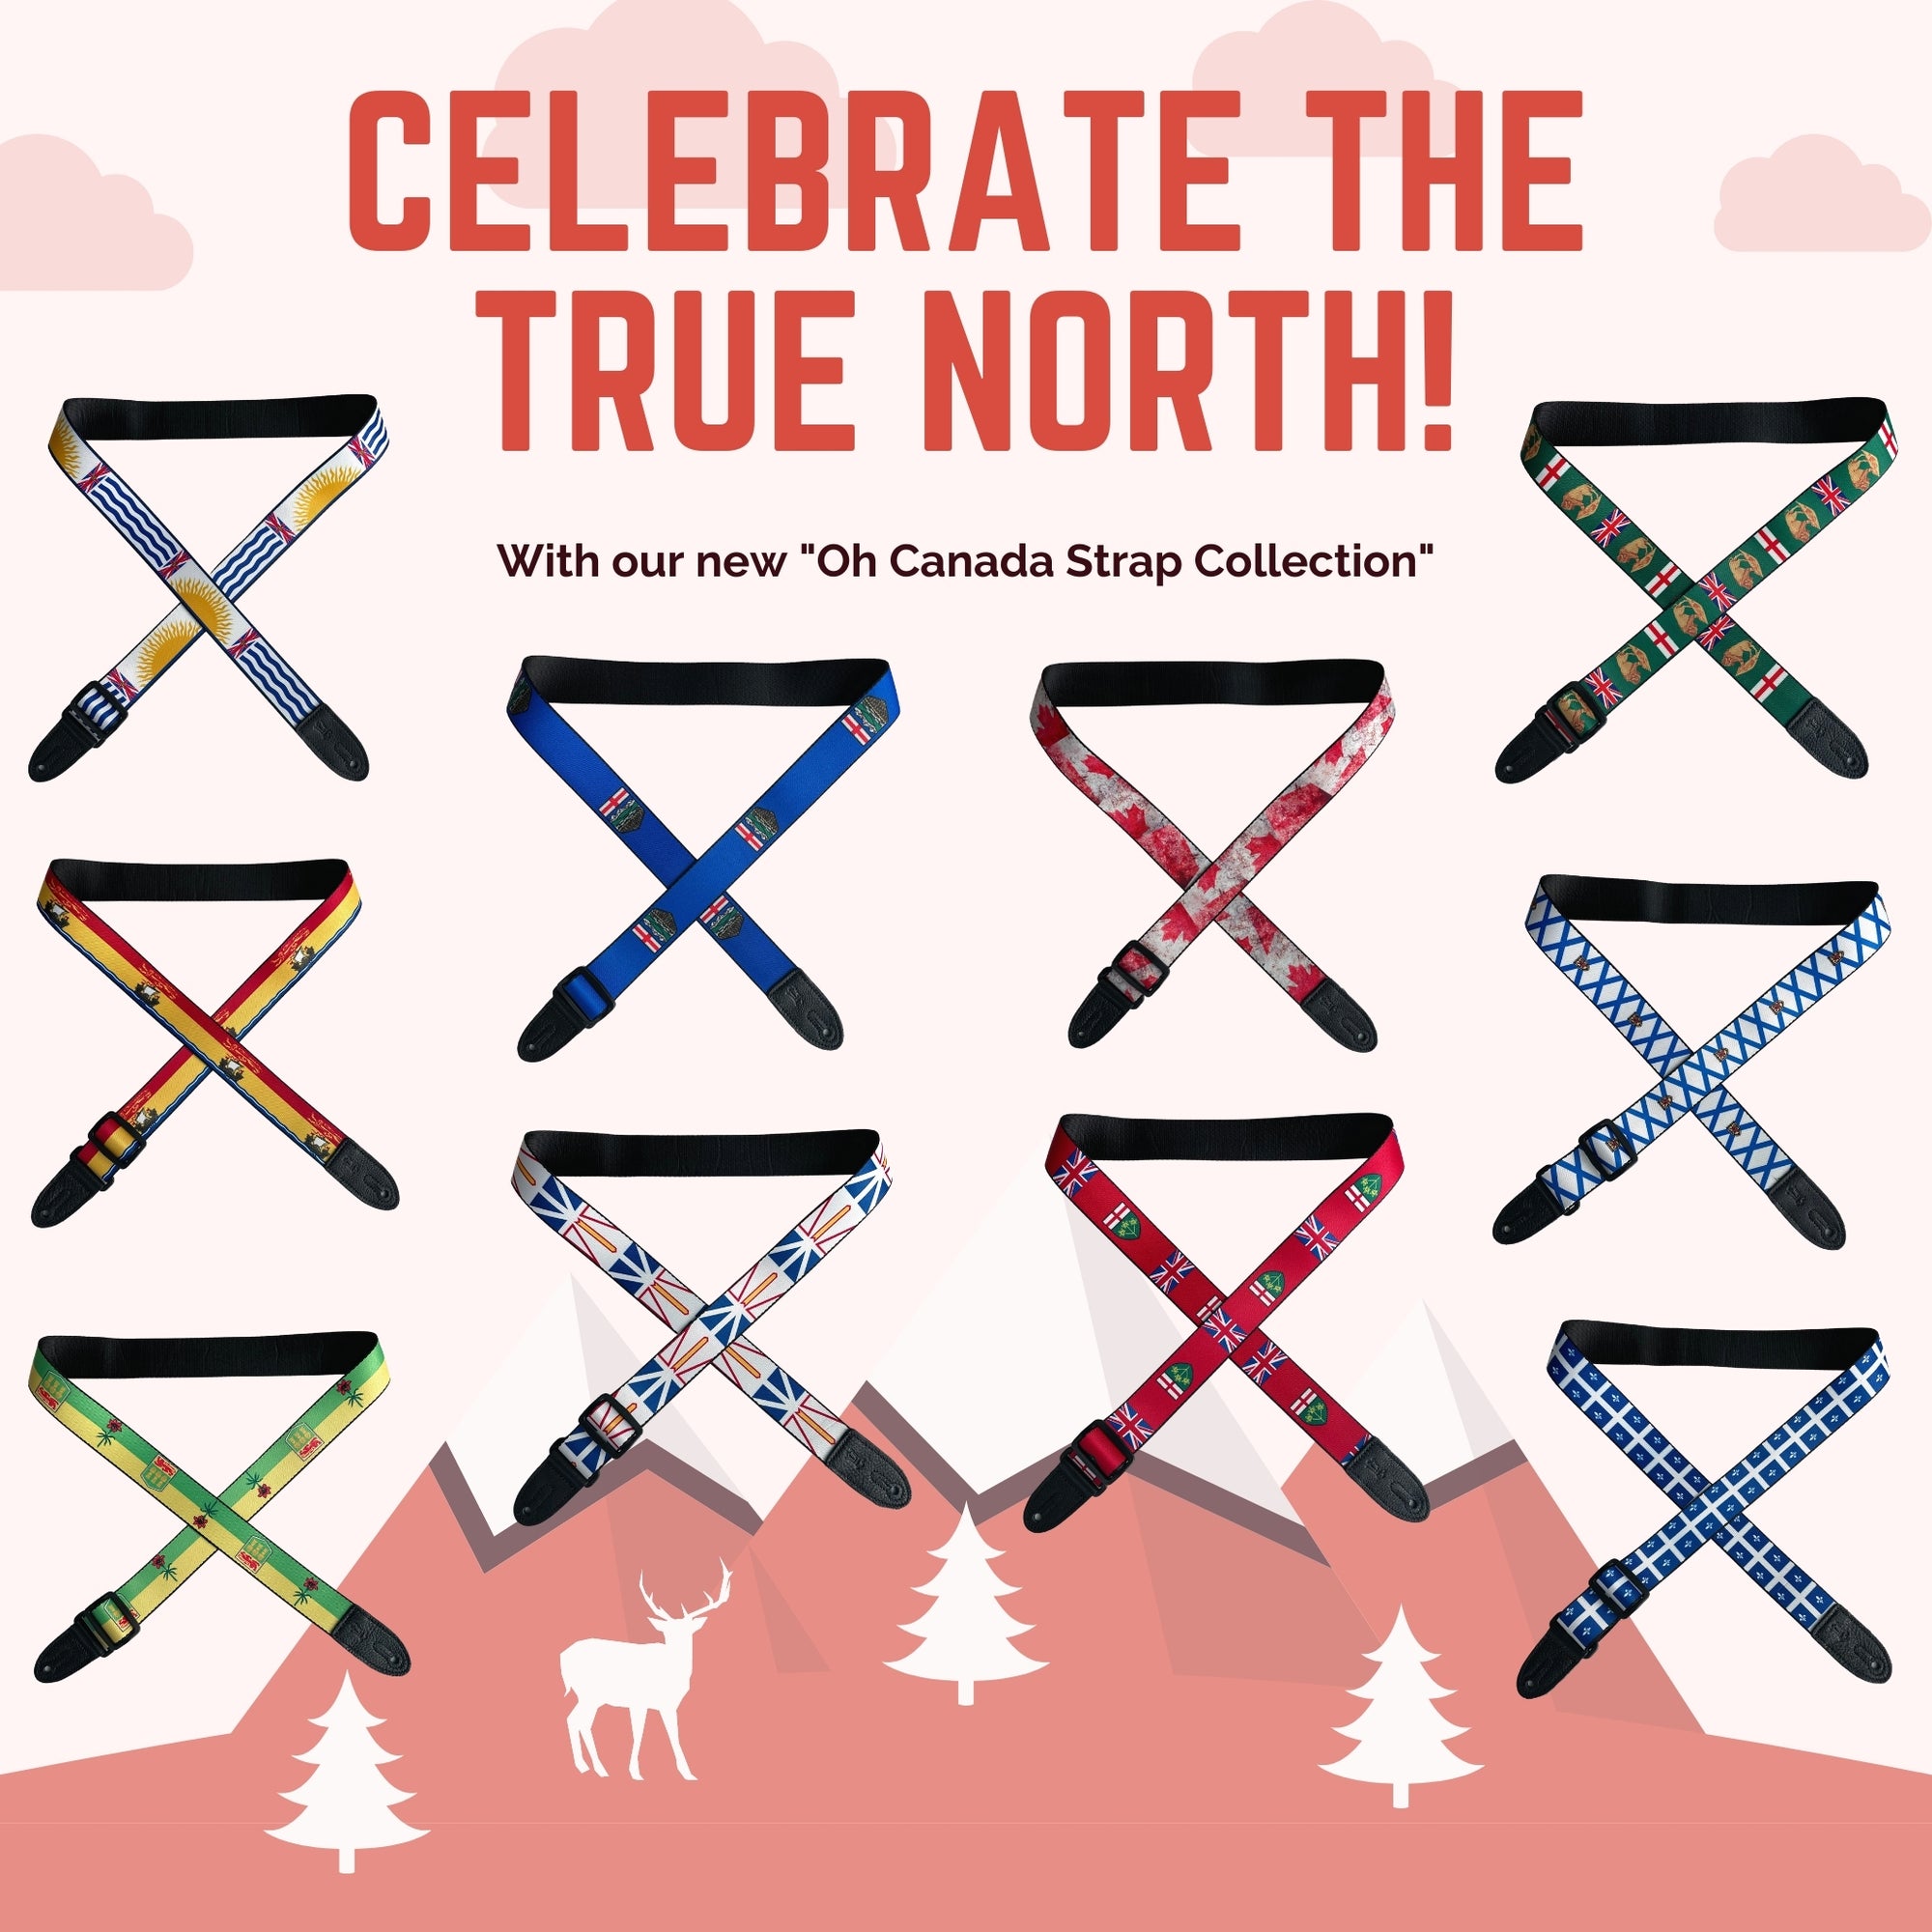 Introducing the Oh Canada strap collection